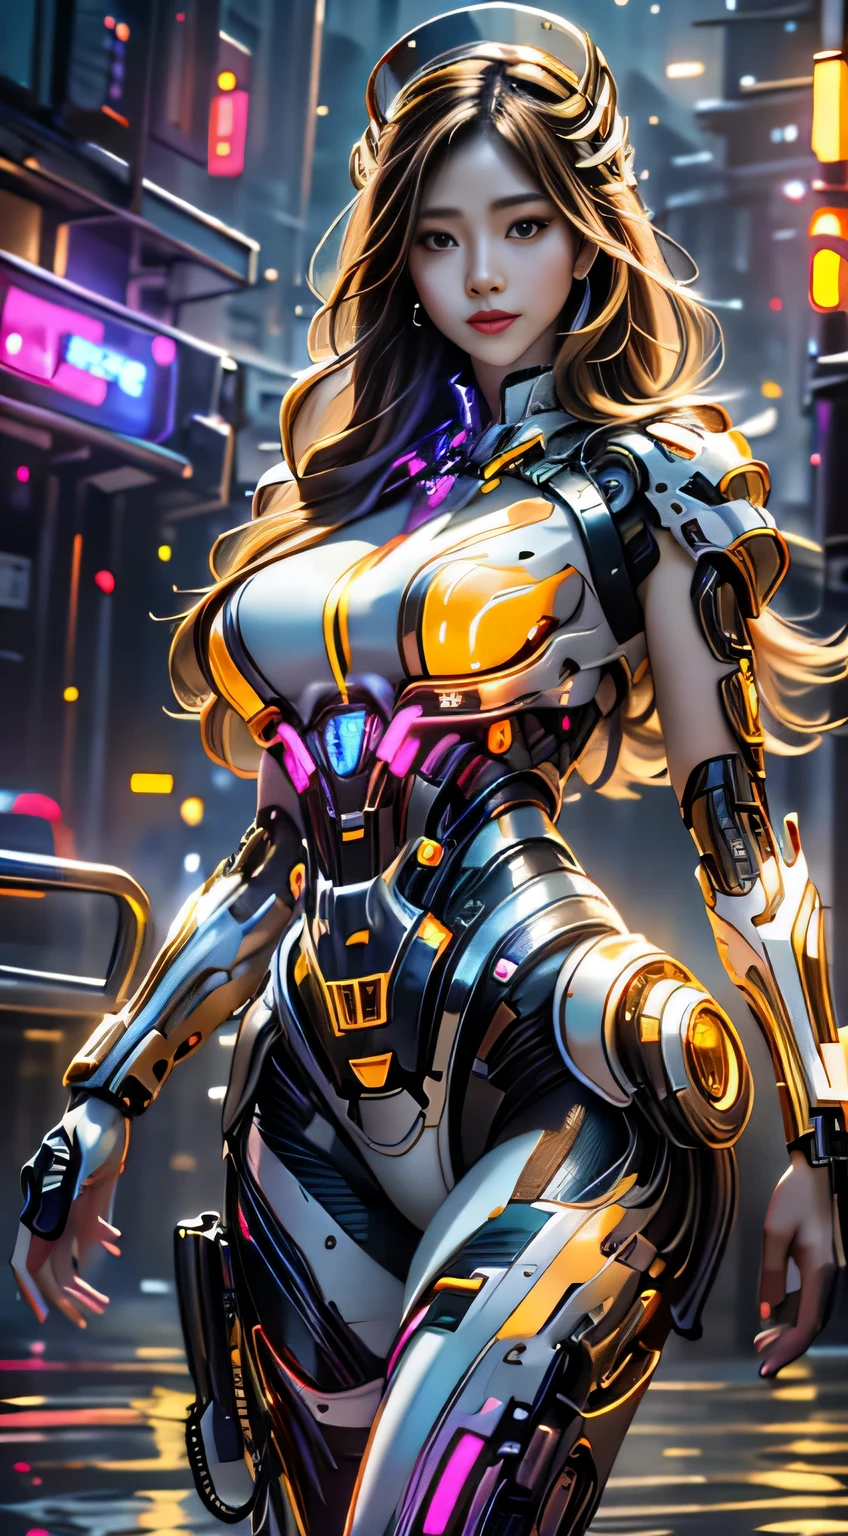 Virtual image,Realistic 8K images,hips up,Masterpiece,Complete Anatomy,Complete dynamic composition,morning sun,Light hits the front,young woman with long brown hair,cybernetic robot((white, yellow, and a red cyberpunk figure.)),Bikini body-white_orange_gold_metal,,white tank top,Abstract city background at night